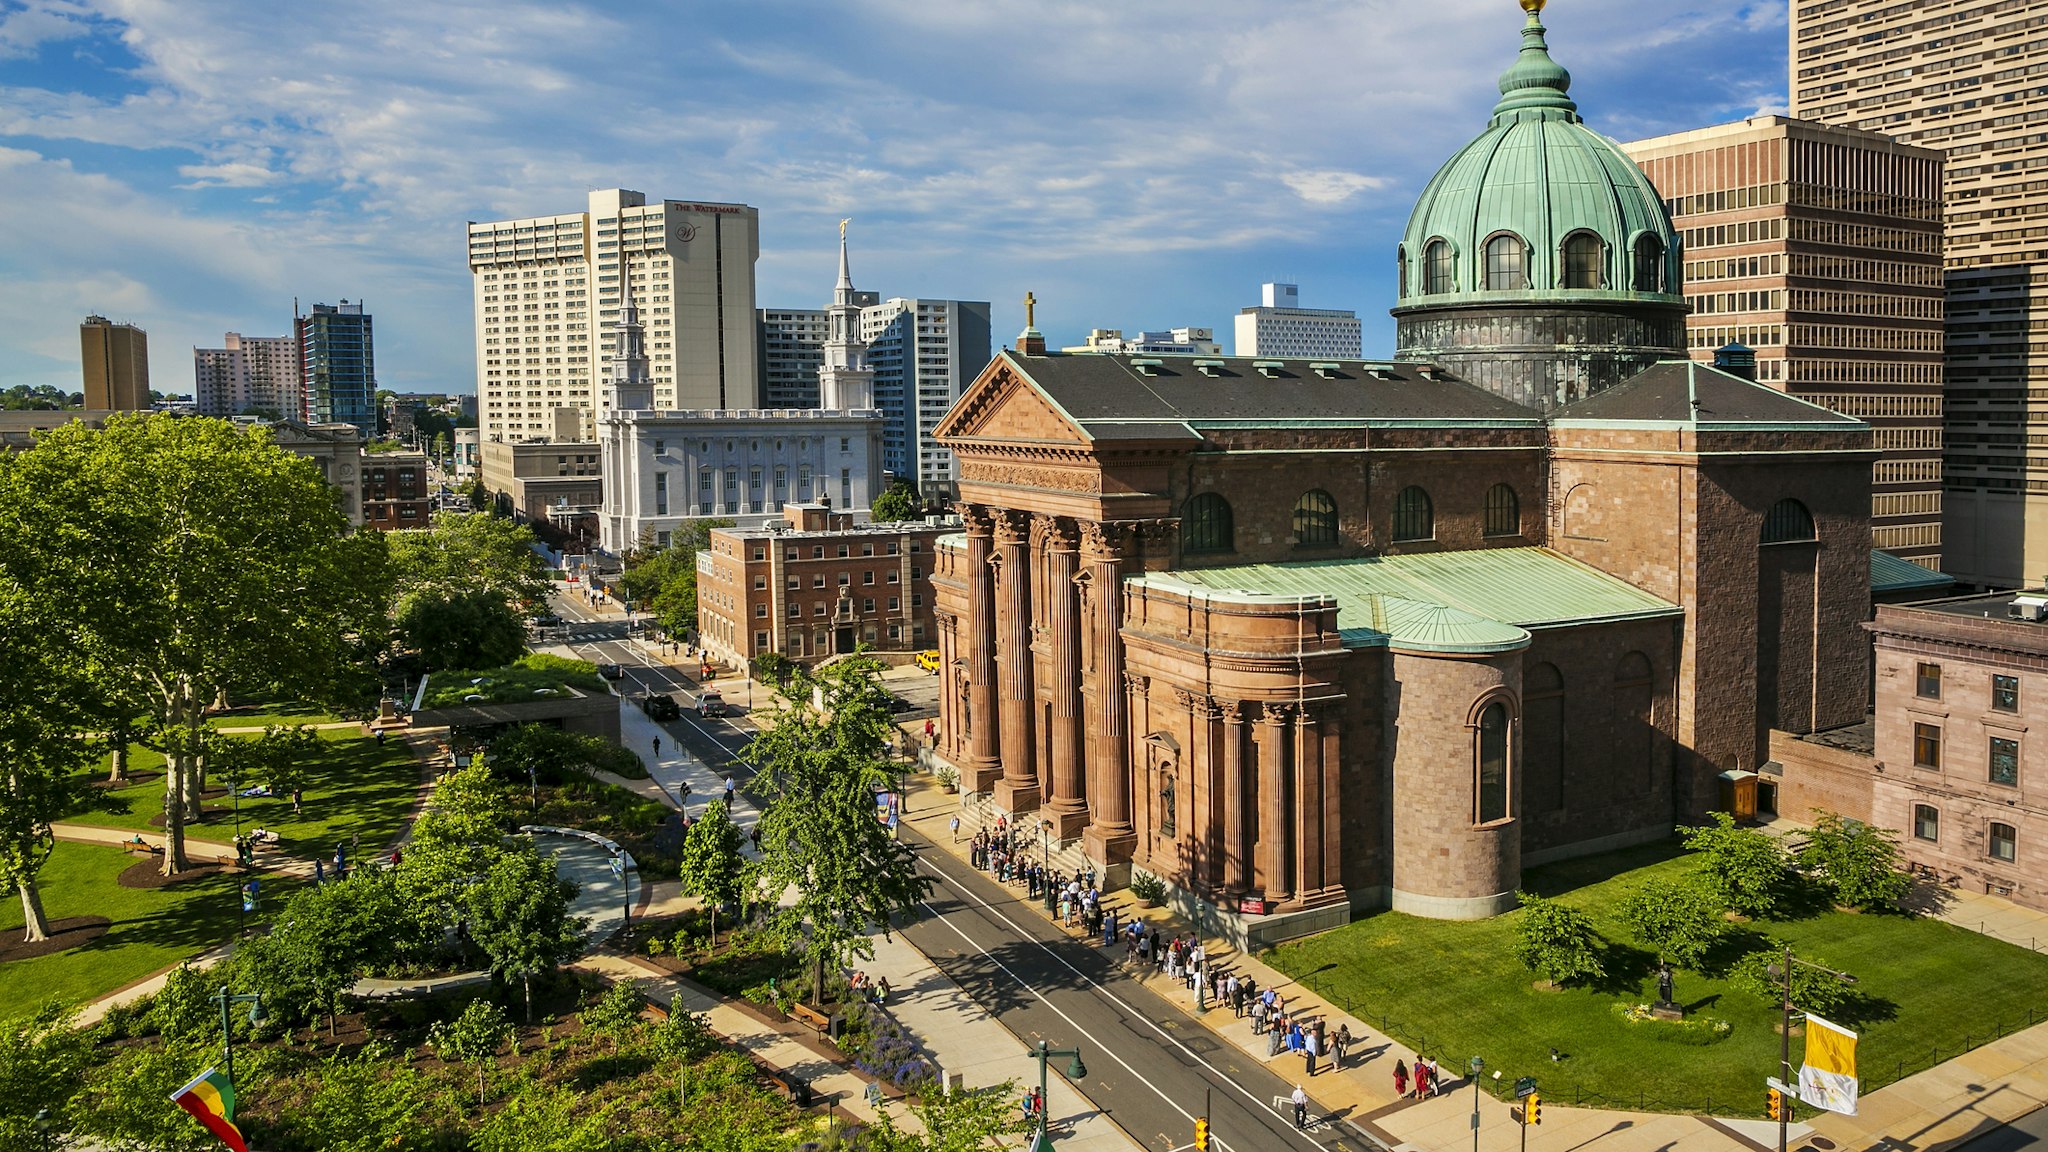 Cathedral Basilica of Saints Peter and Paul at Philadelphia.